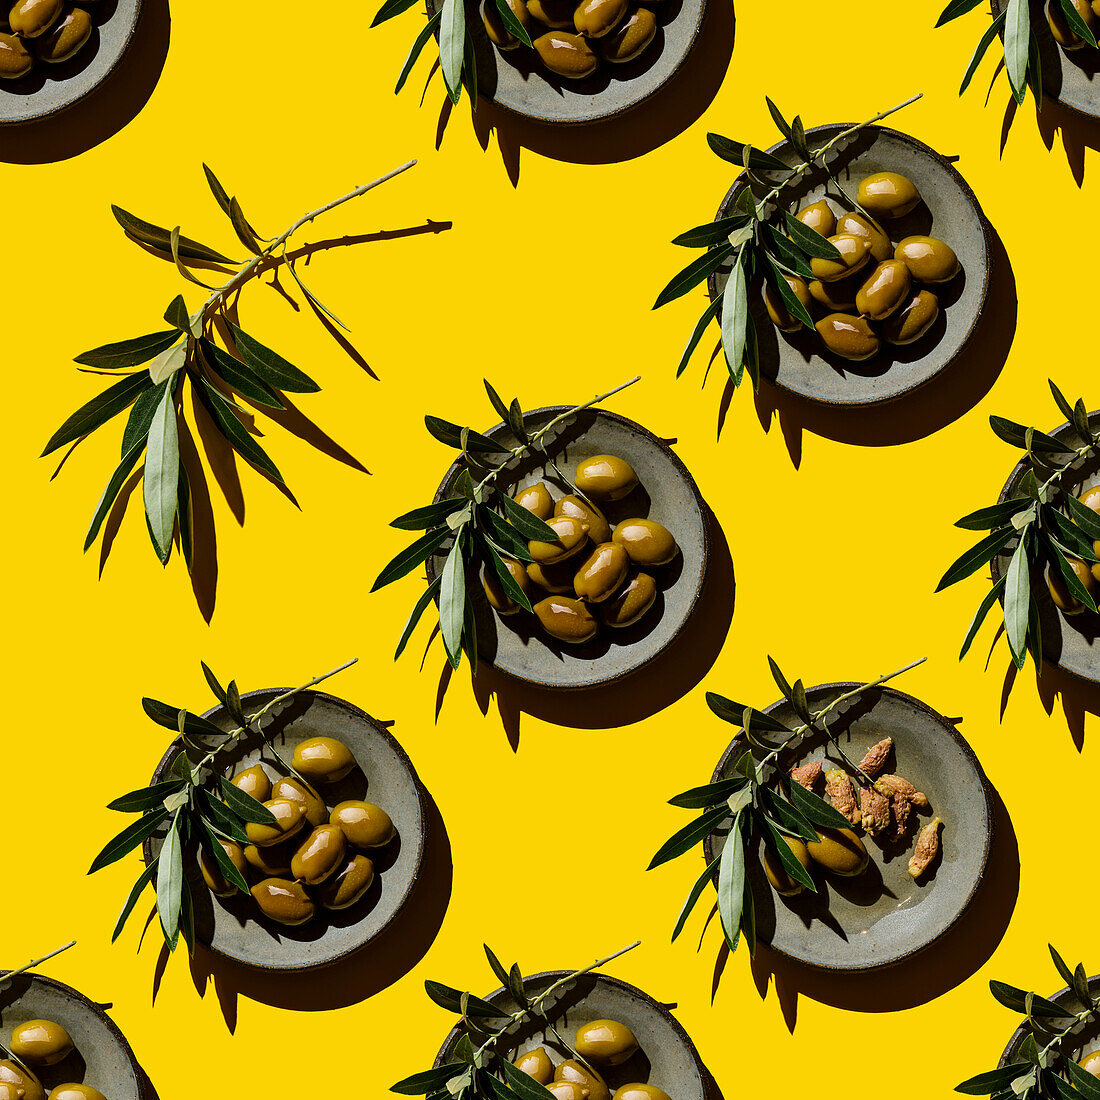 Green olives on a plate on a yellow background pattern